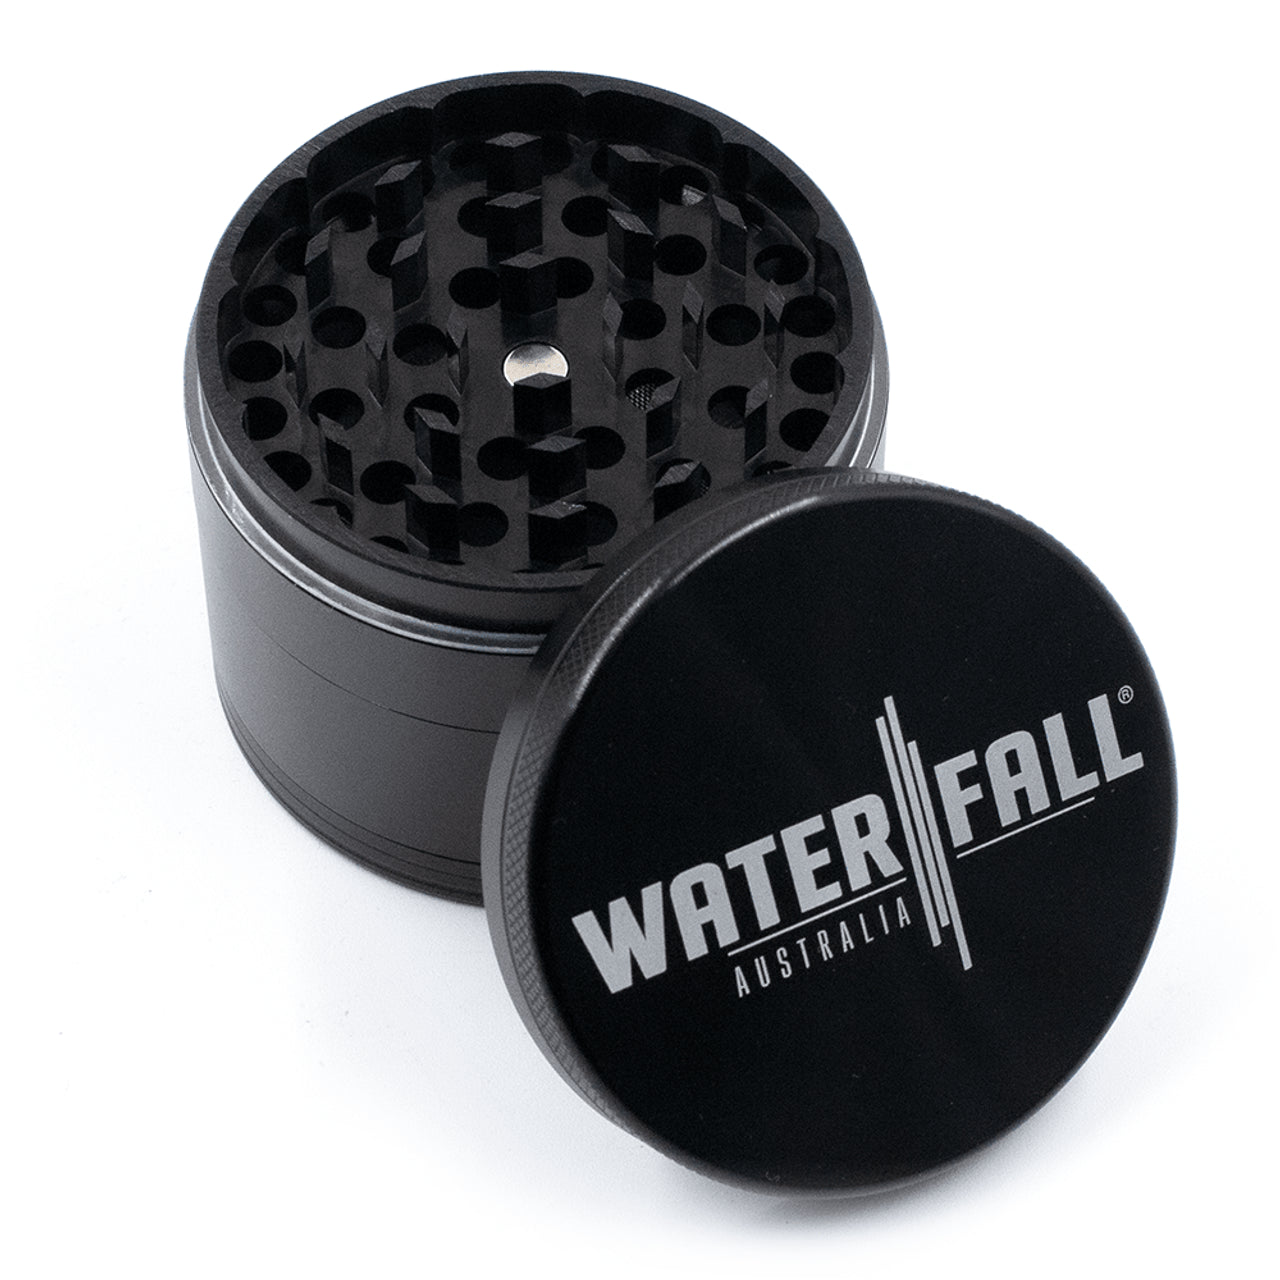 Buy Waterfall 4 Part Grinder 63mm - Wick and Wire Co Melbourne Vape Shop, Victoria Australia